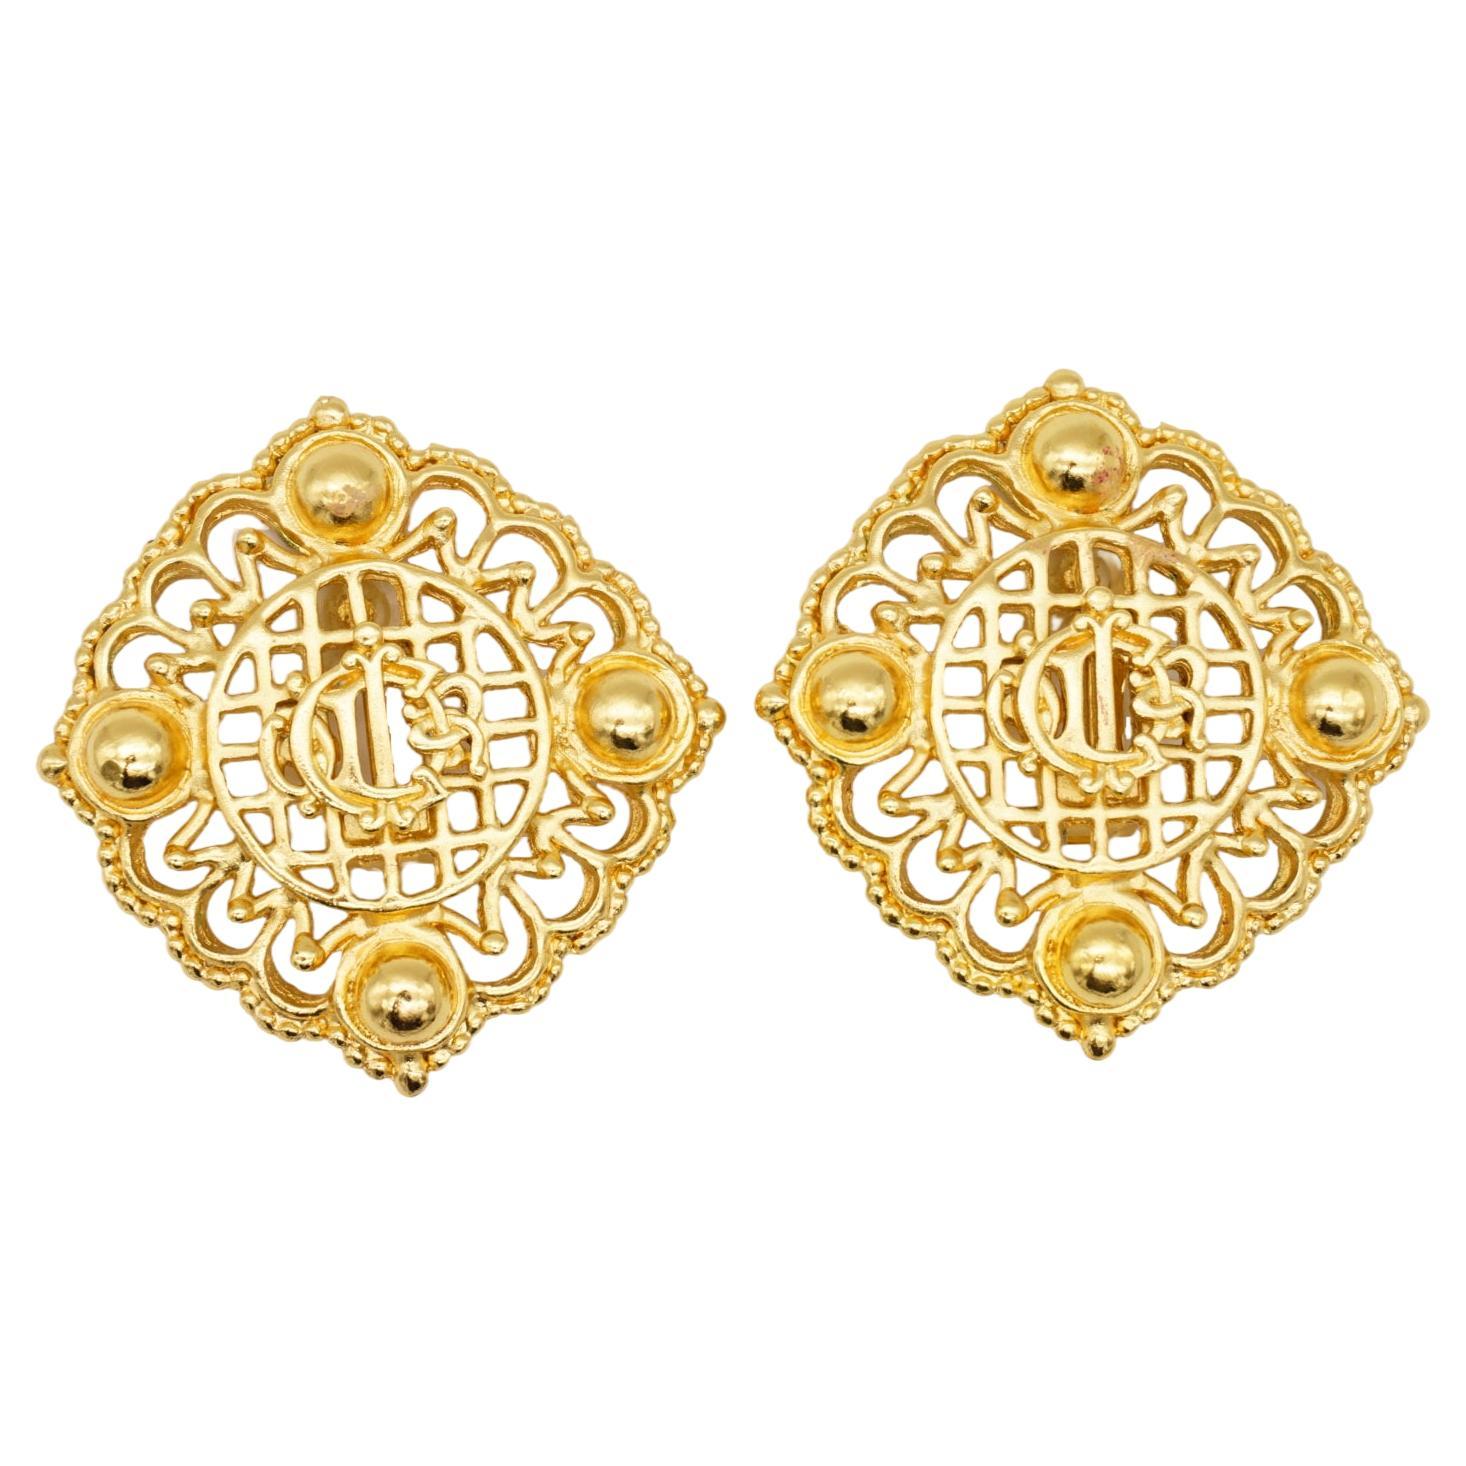 Christian Dior 1980s Vintage Large Monogram Insignia Crest Openwork Earrings For Sale